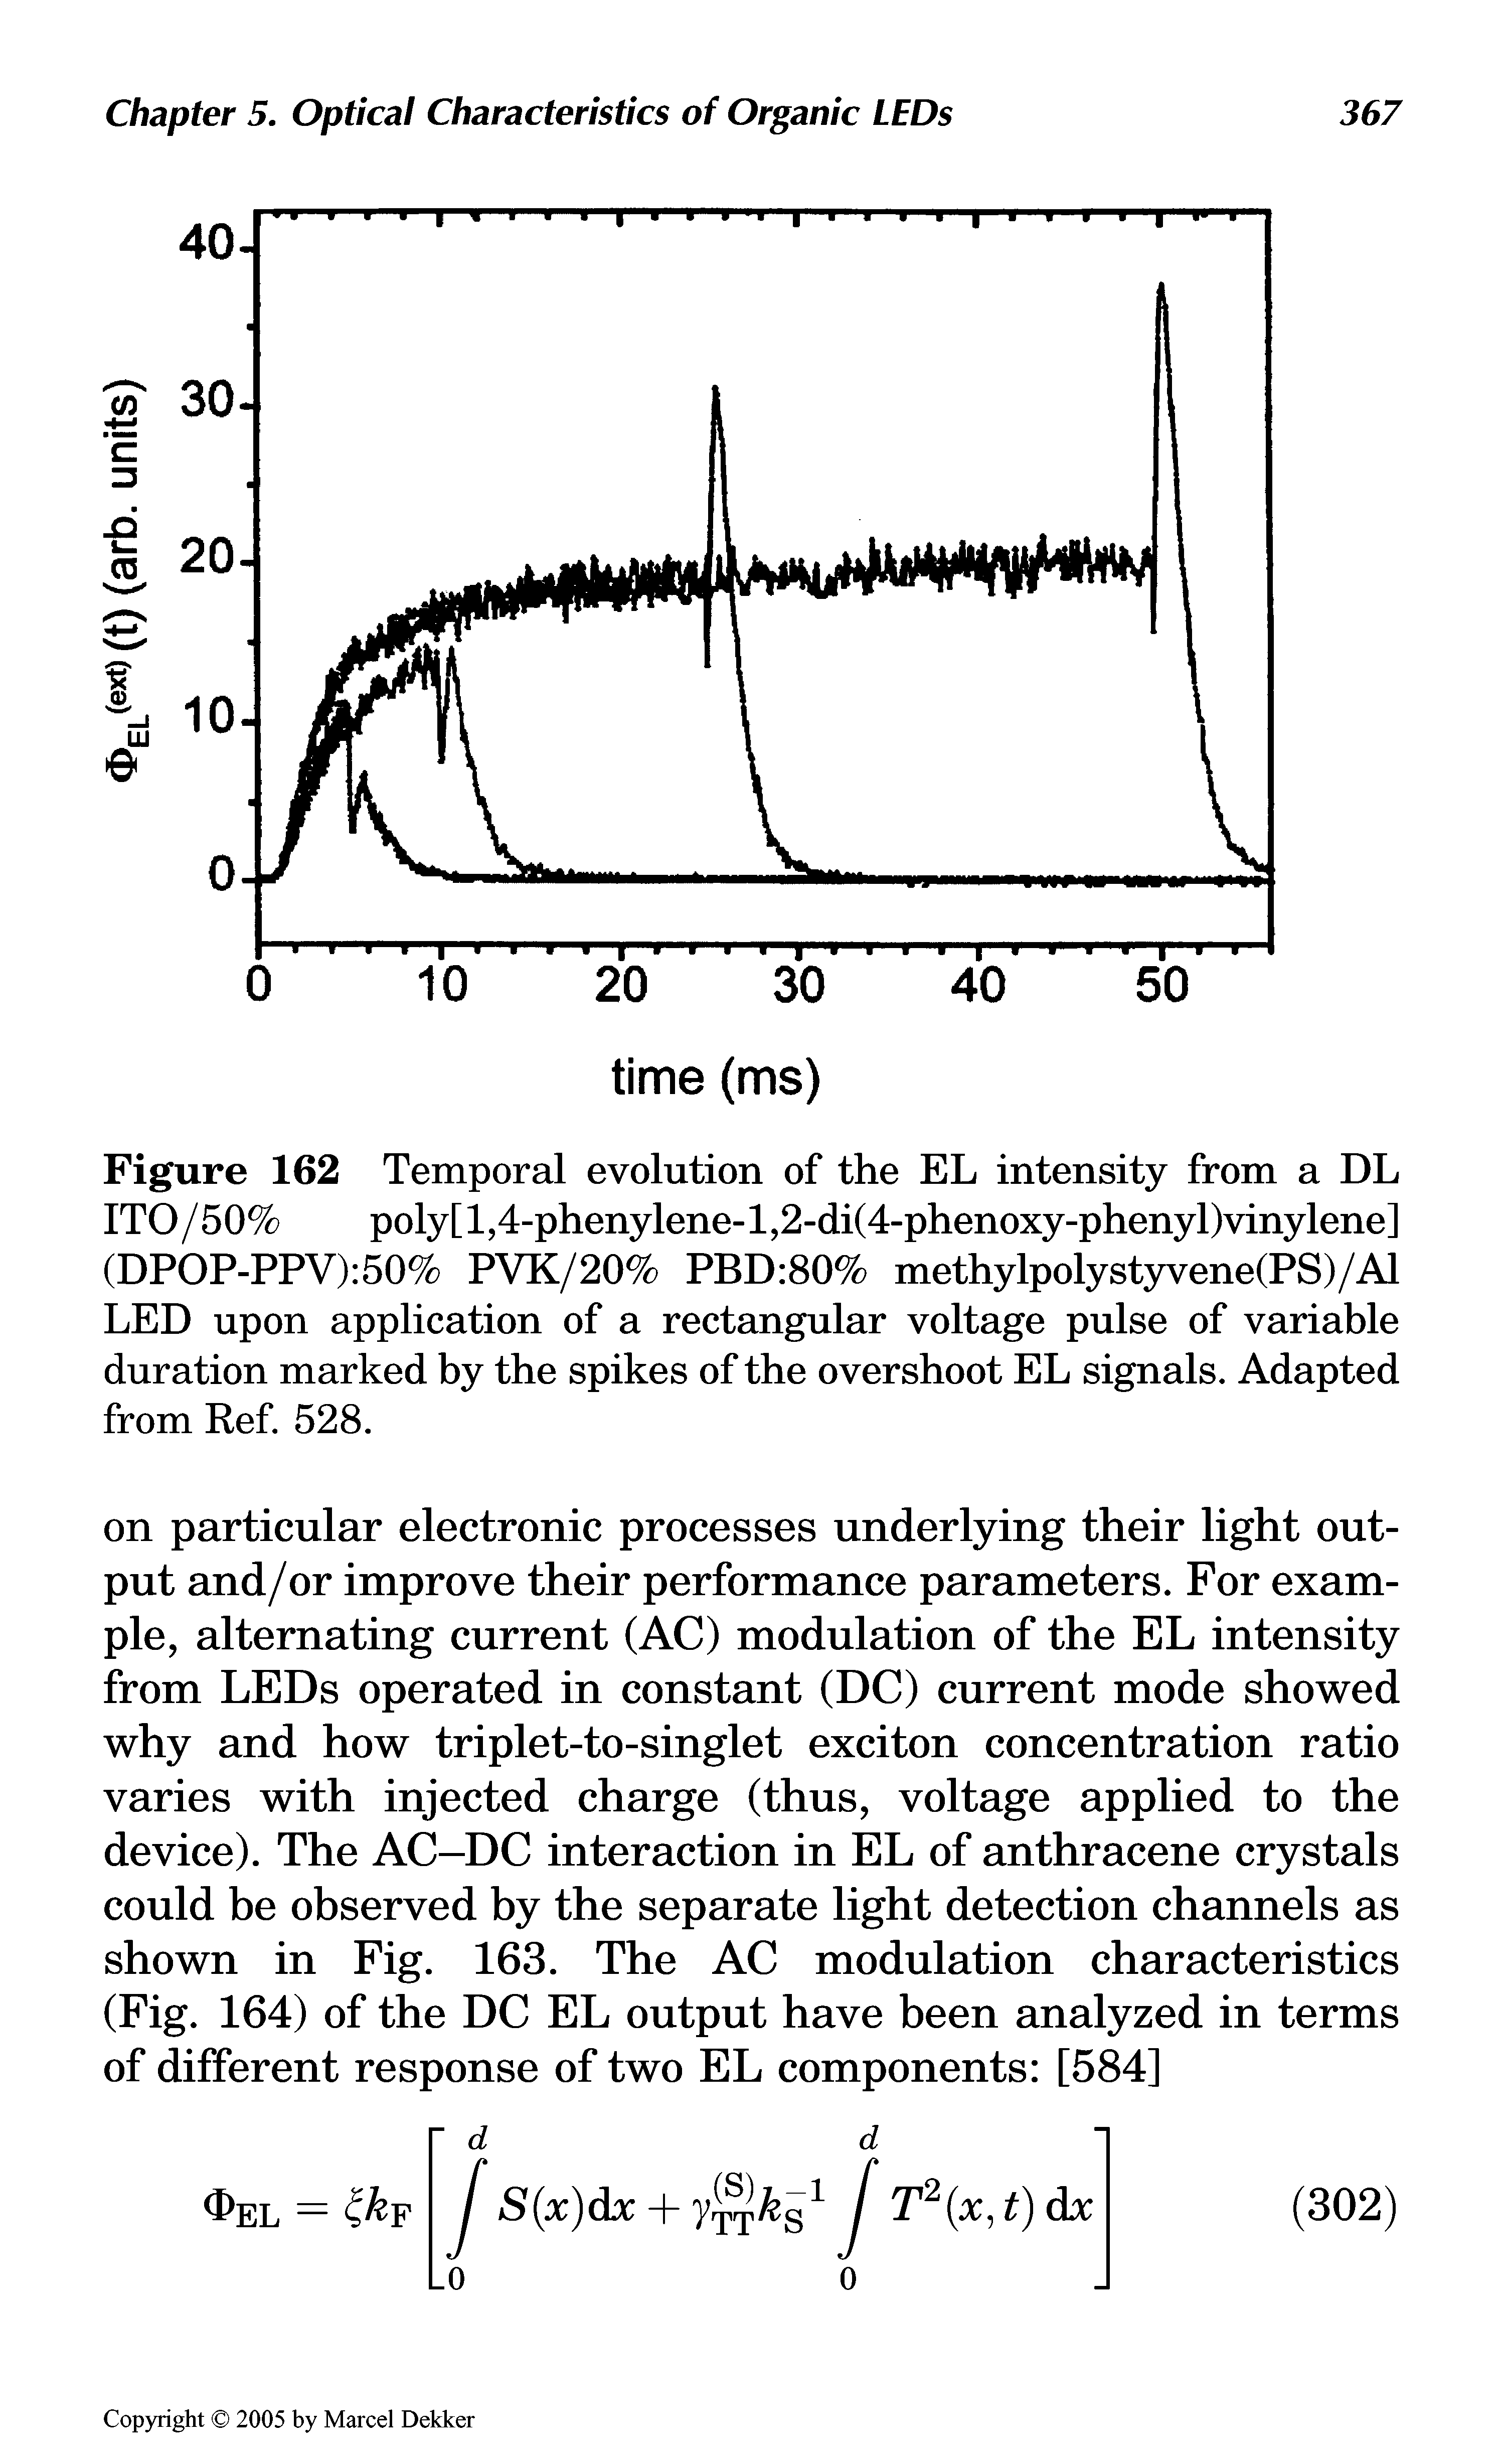 Figure 162 Temporal evolution of the EL intensity from a DL ITO/50% poly[l,4-phenylene-l,2-di(4-phenoxy-phenyl)vinylene]...